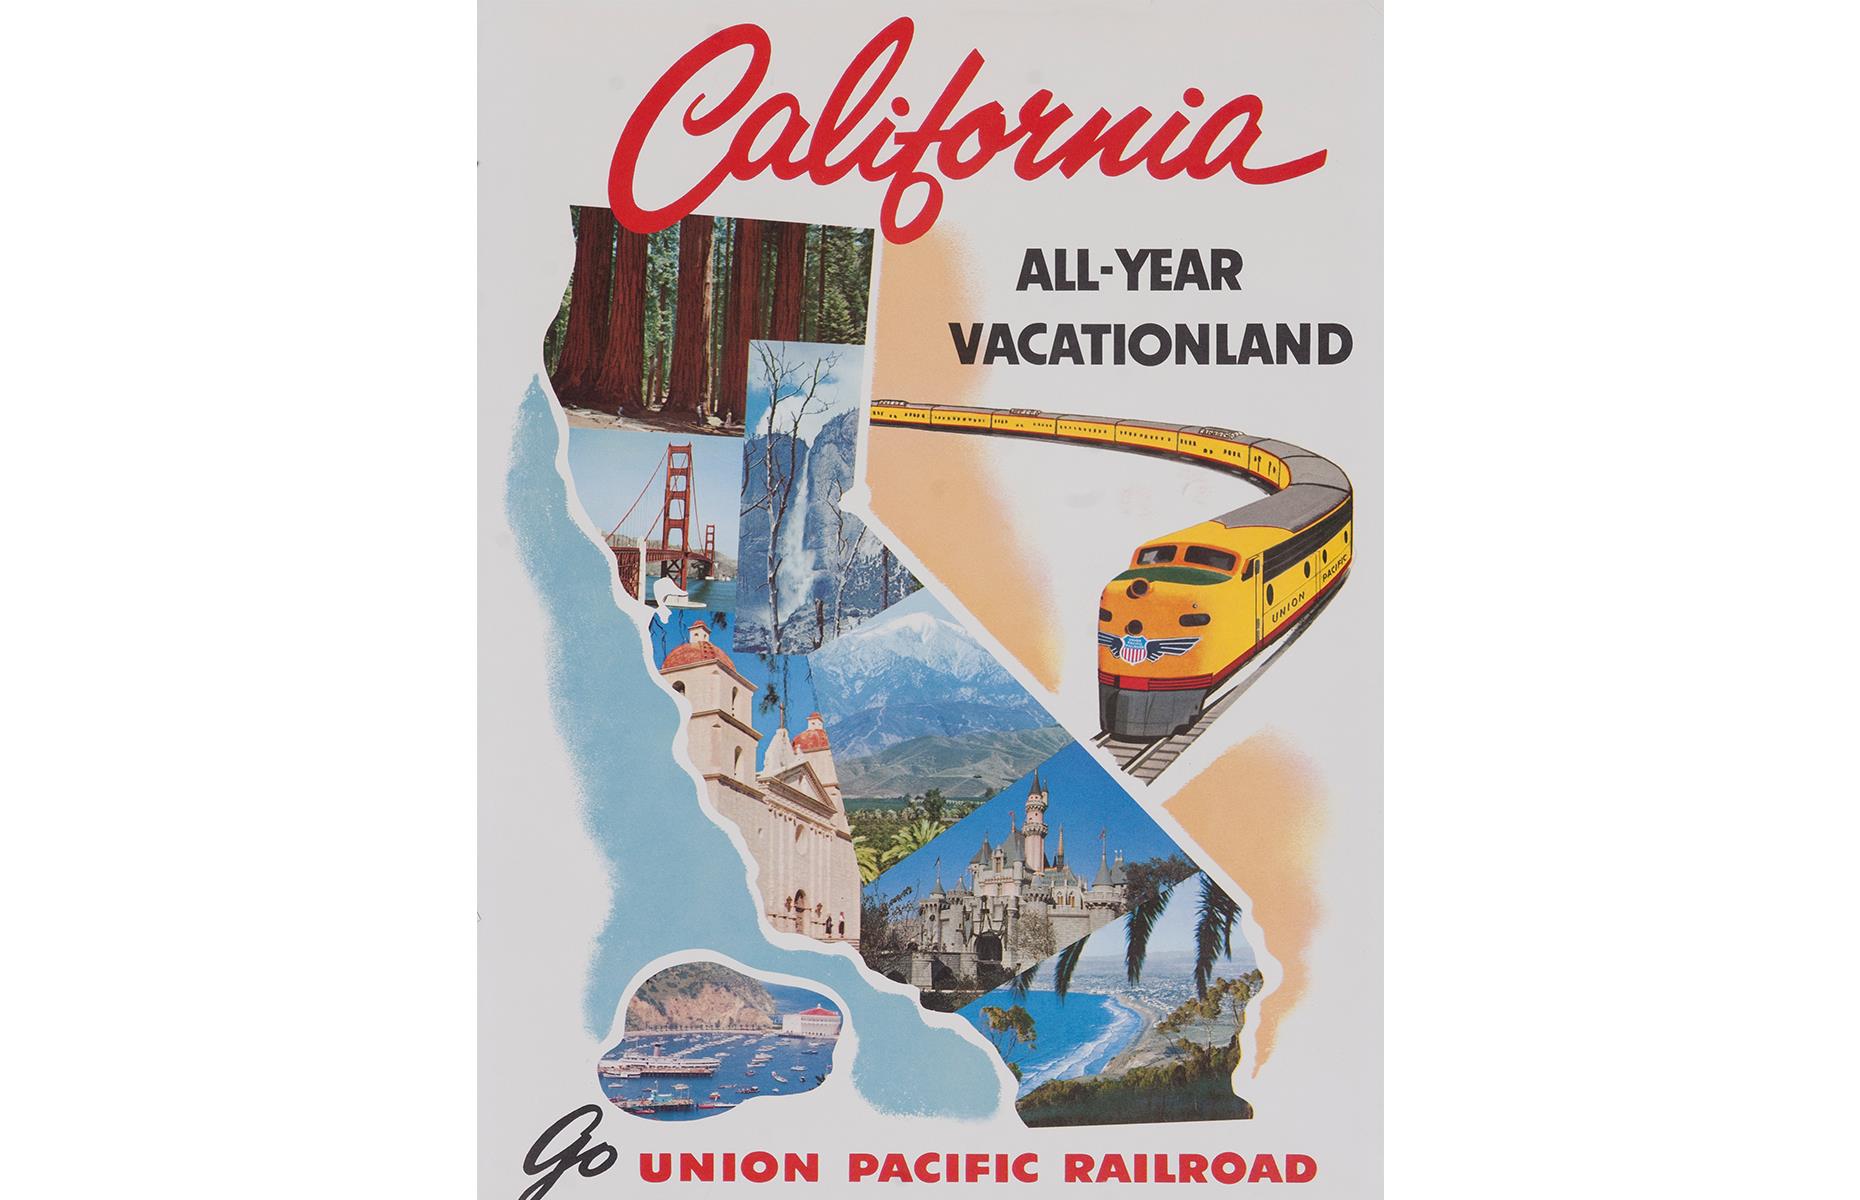 <p>This vintage ad from the Union Pacific Railroad will have you dreaming of a Californian escape. The retro poster sees one of the Union Pacific Railroad's signature yellow trains join some of the Golden State's bucket-list sights. Soaring sequoia trees and Santa Catalina Island sit alongside the Golden Gate Bridge and Disneyland's Sleeping Beauty Castle. </p>